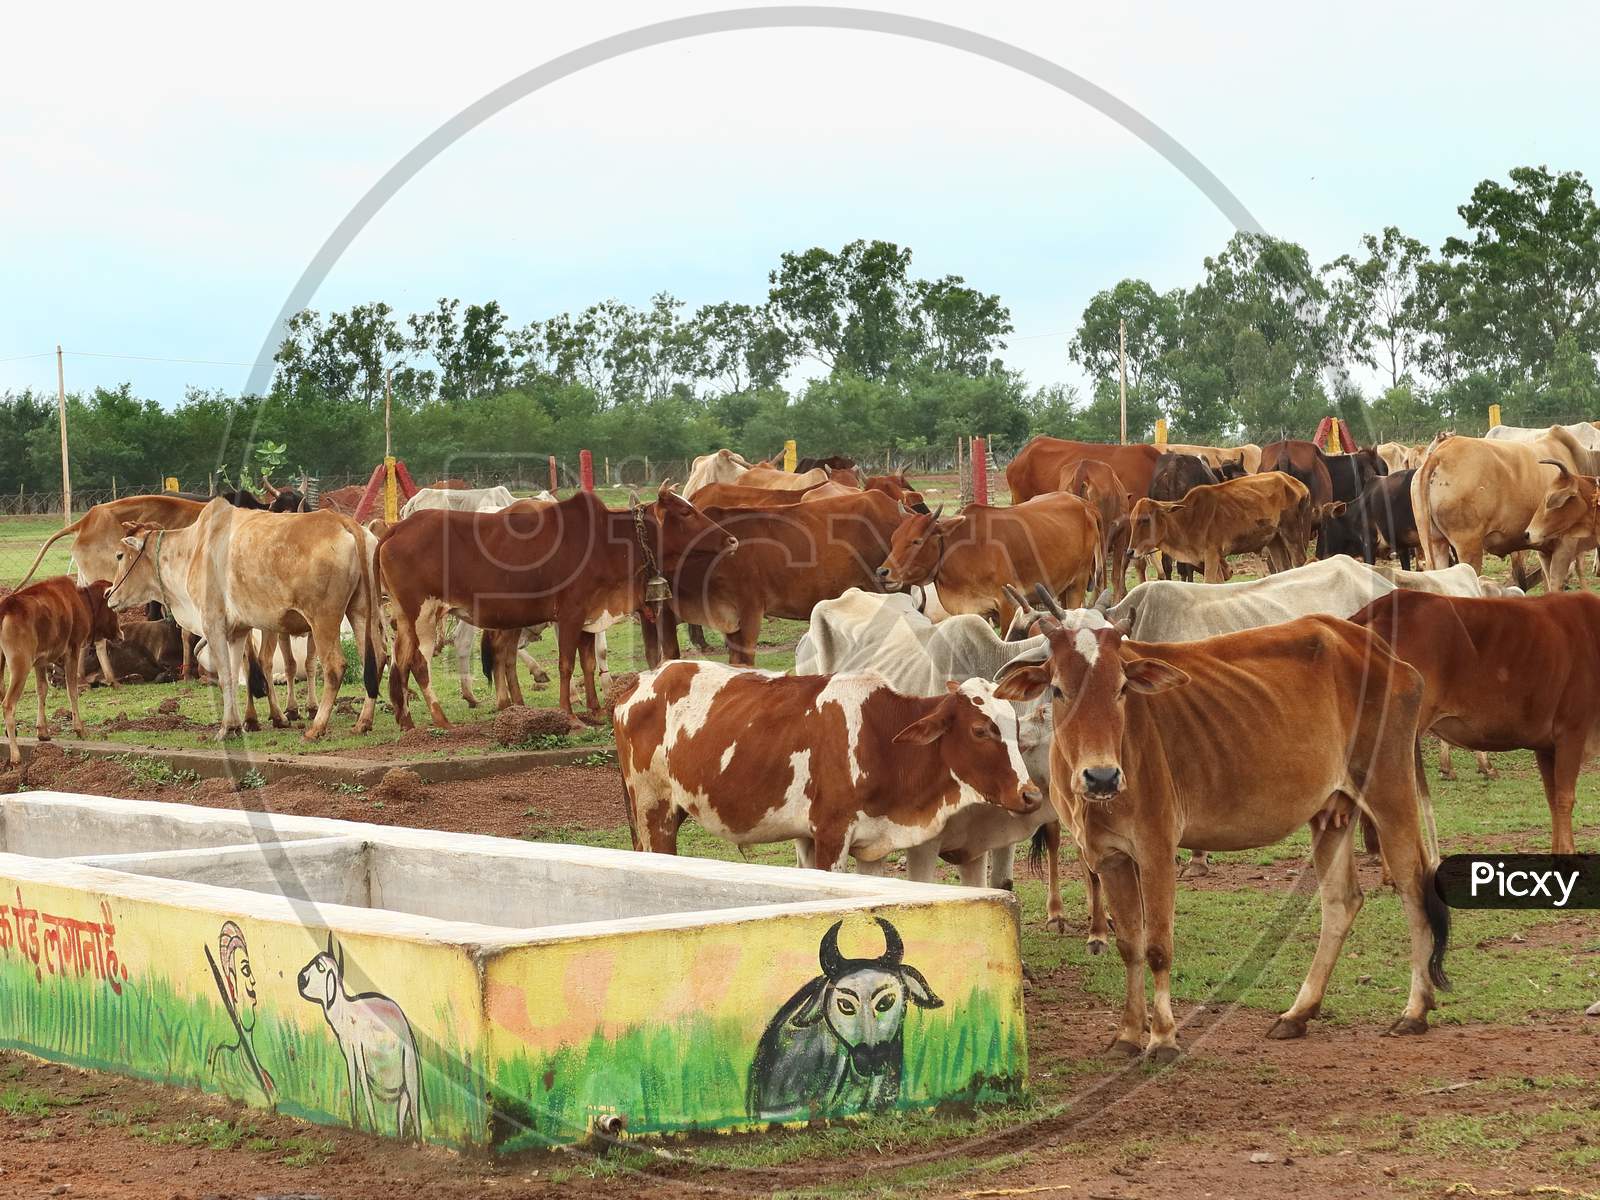 Cow shelter in village of chhattisgarh for organic compost.